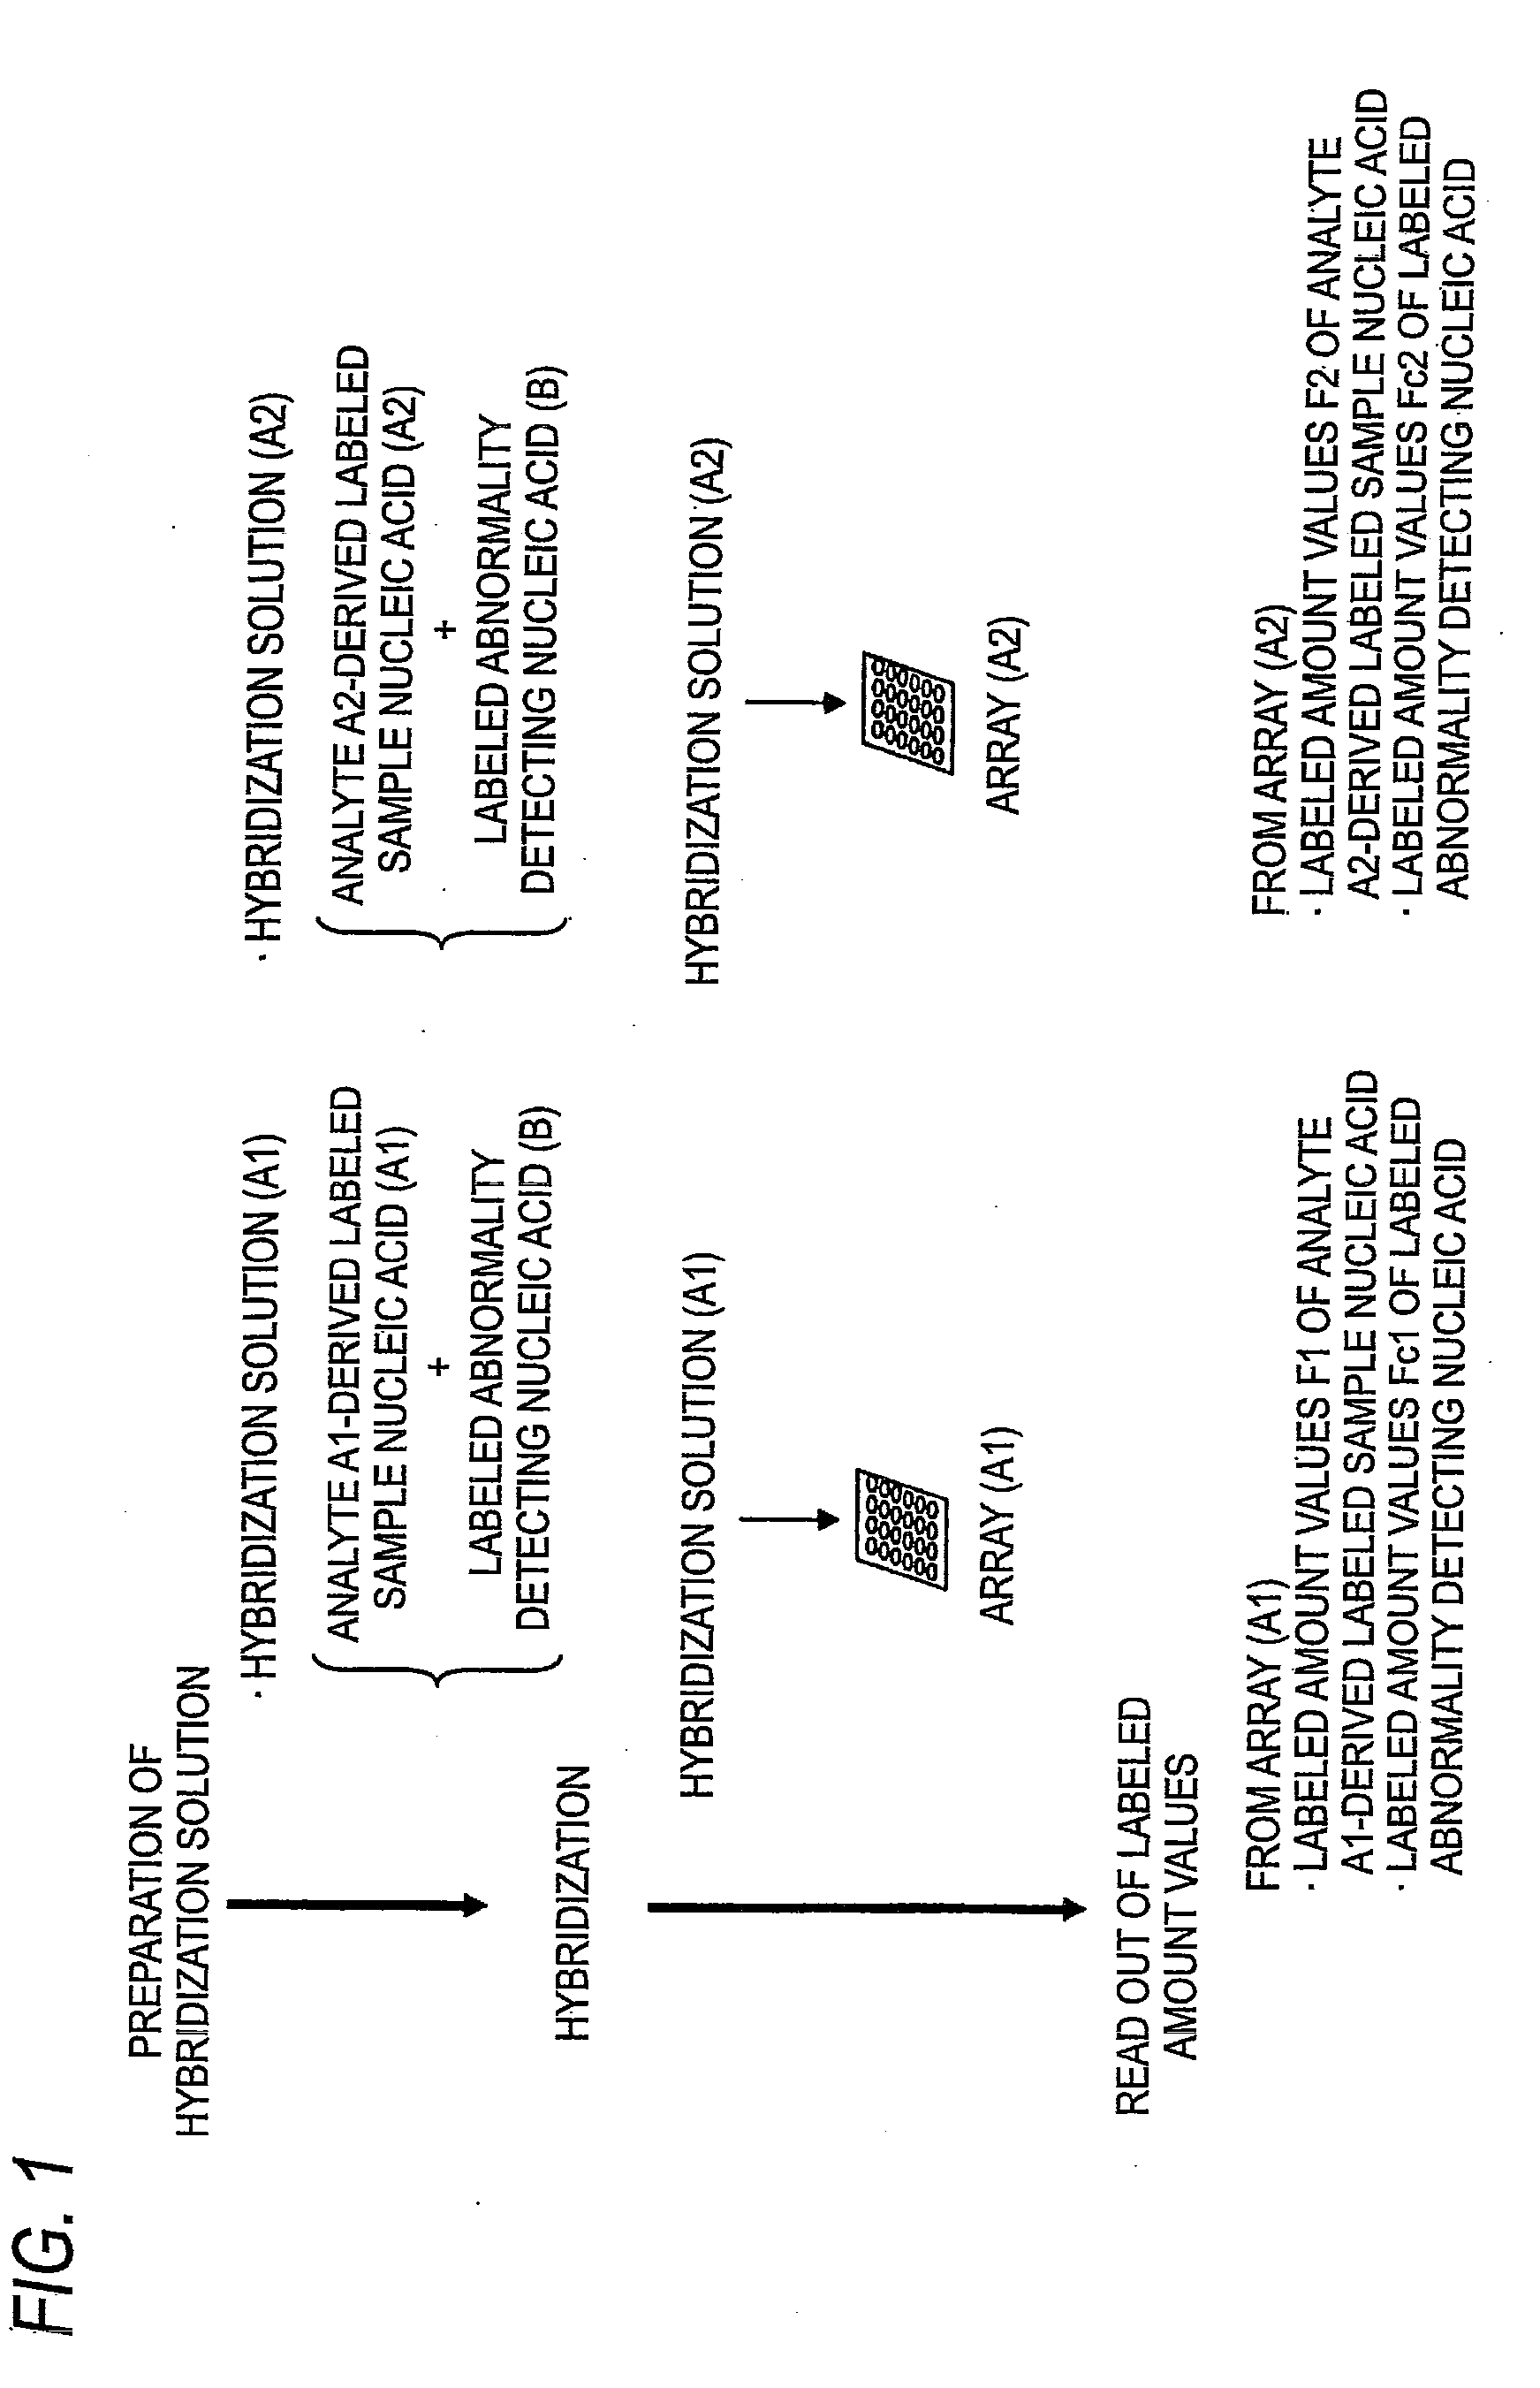 Method for detecting abnormal spots of nucleic acid microarray